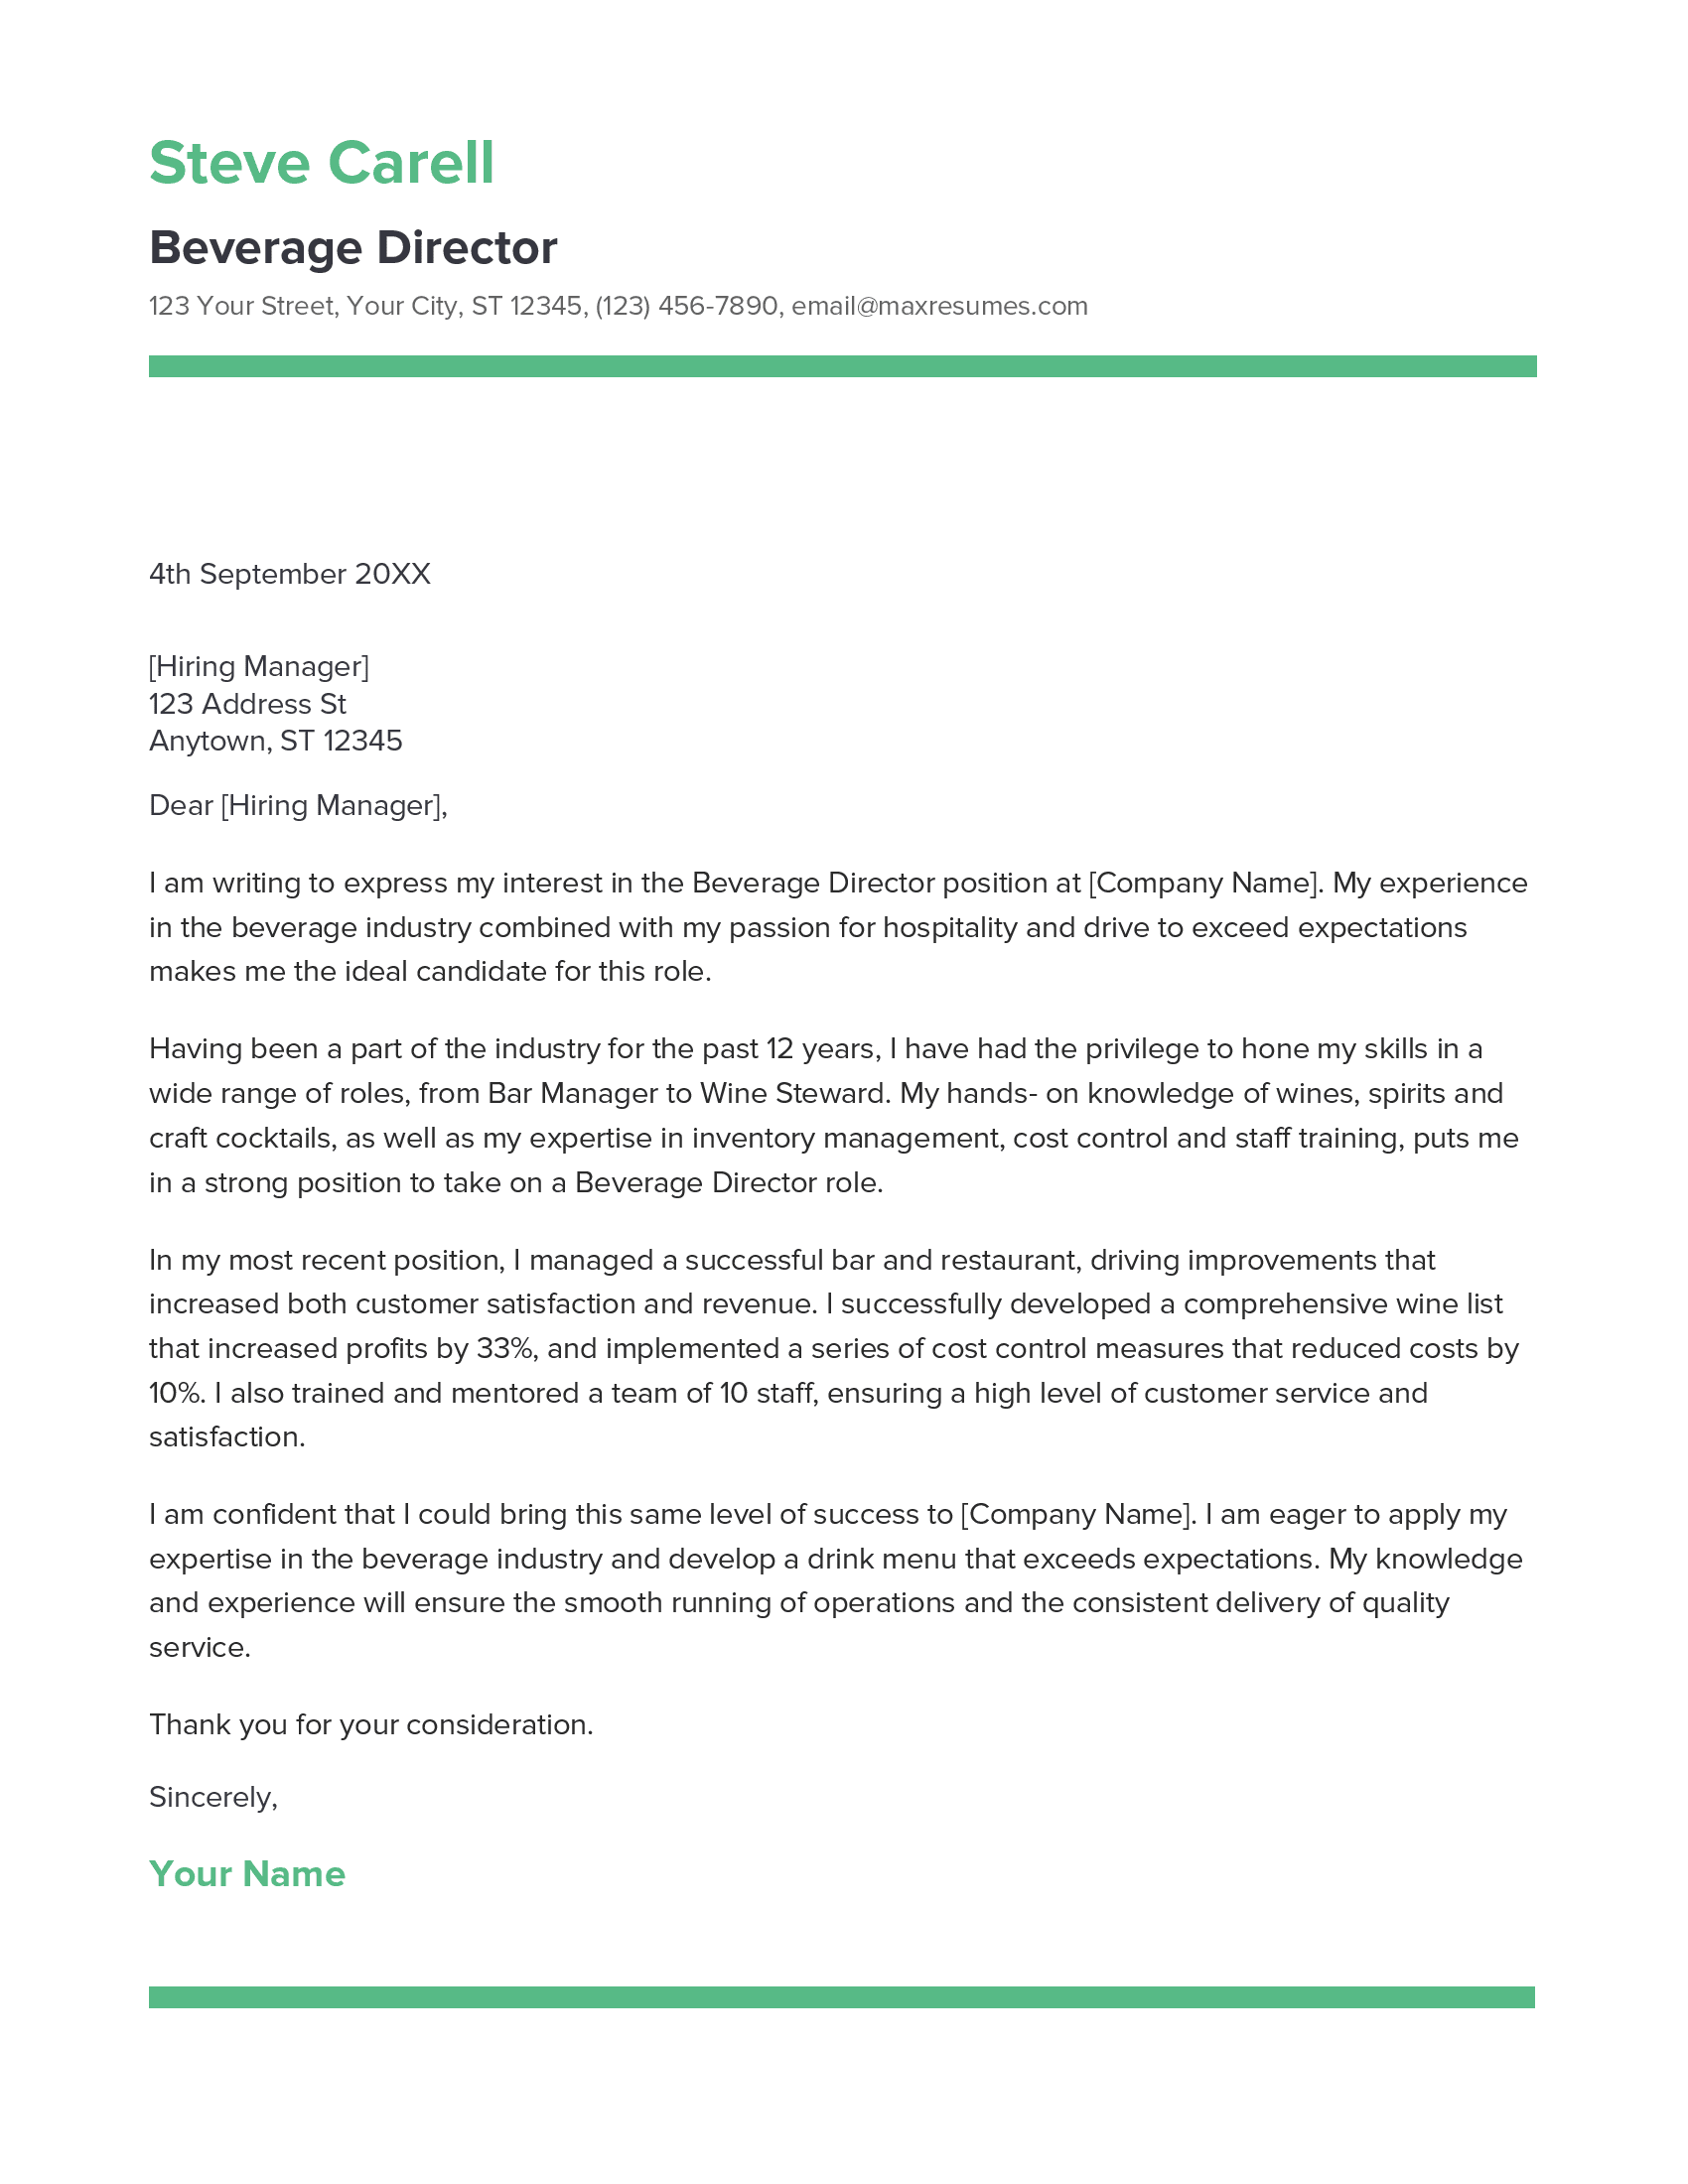 Beverage Director Cover Letter Example